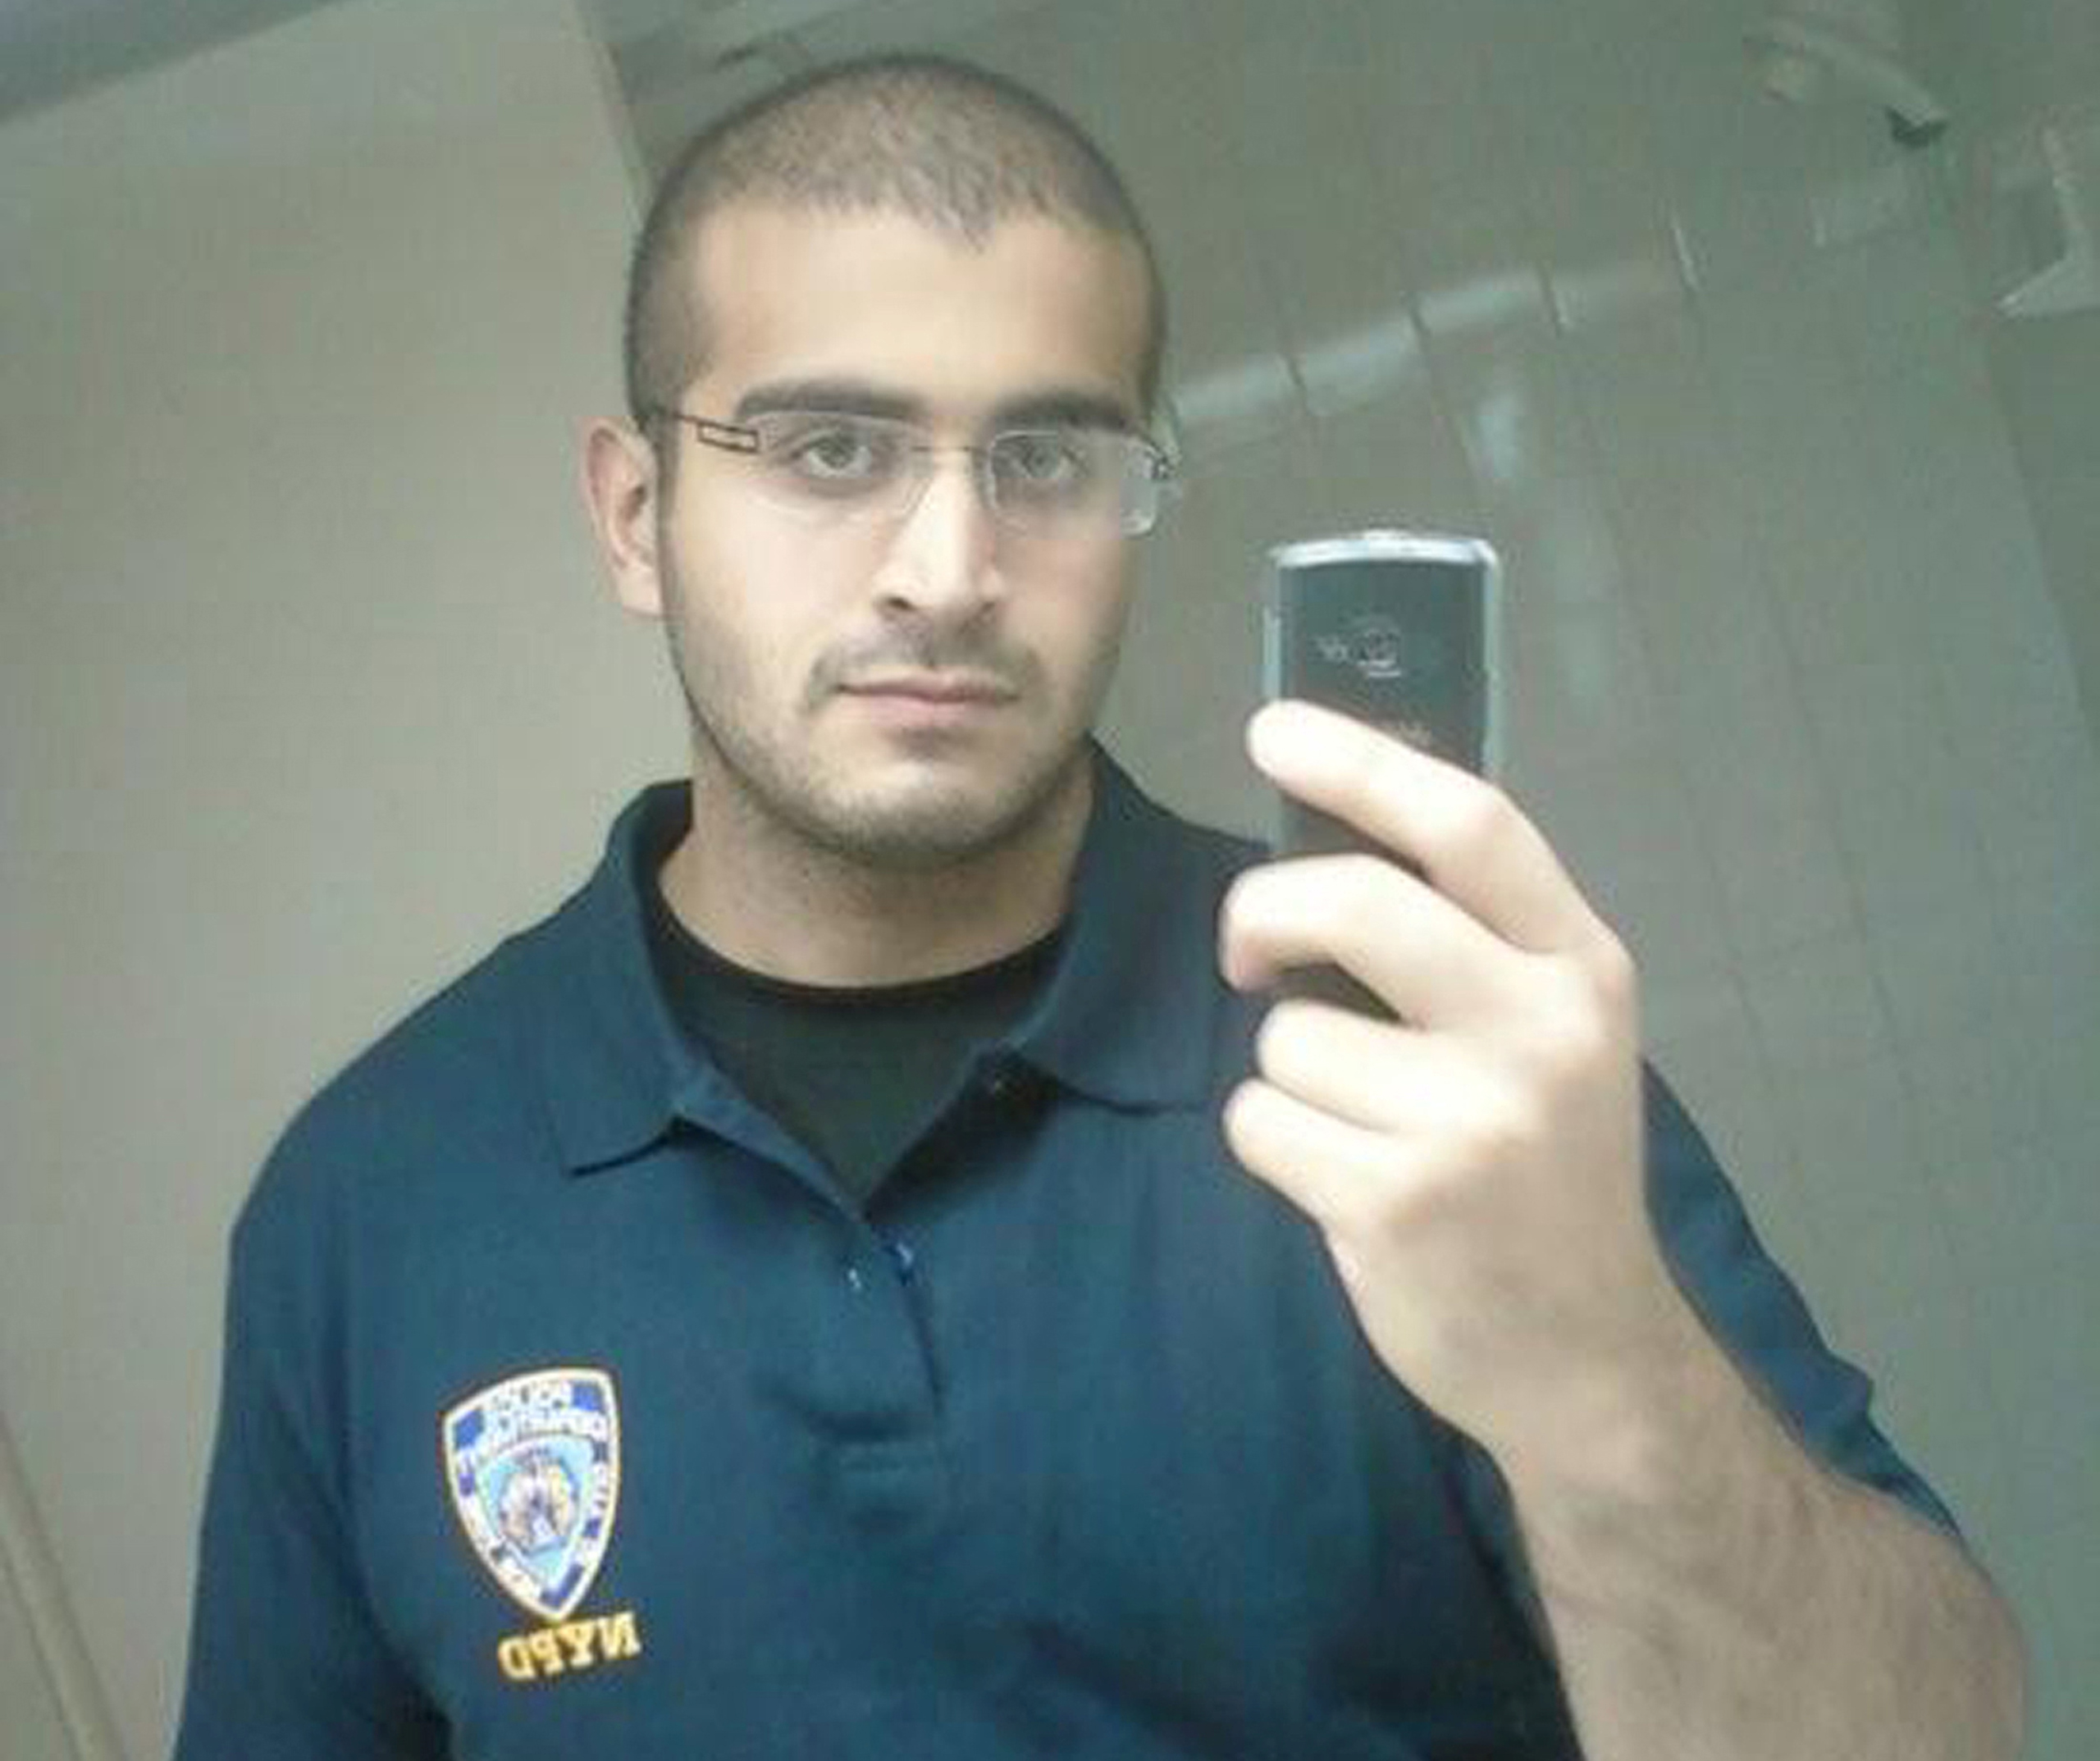 An undated photo of Omar Mateen, identified as the gunman in mass shooting at a gay club in Orlando, Fla., released on June 12, 2016. (Handout/Reuters)